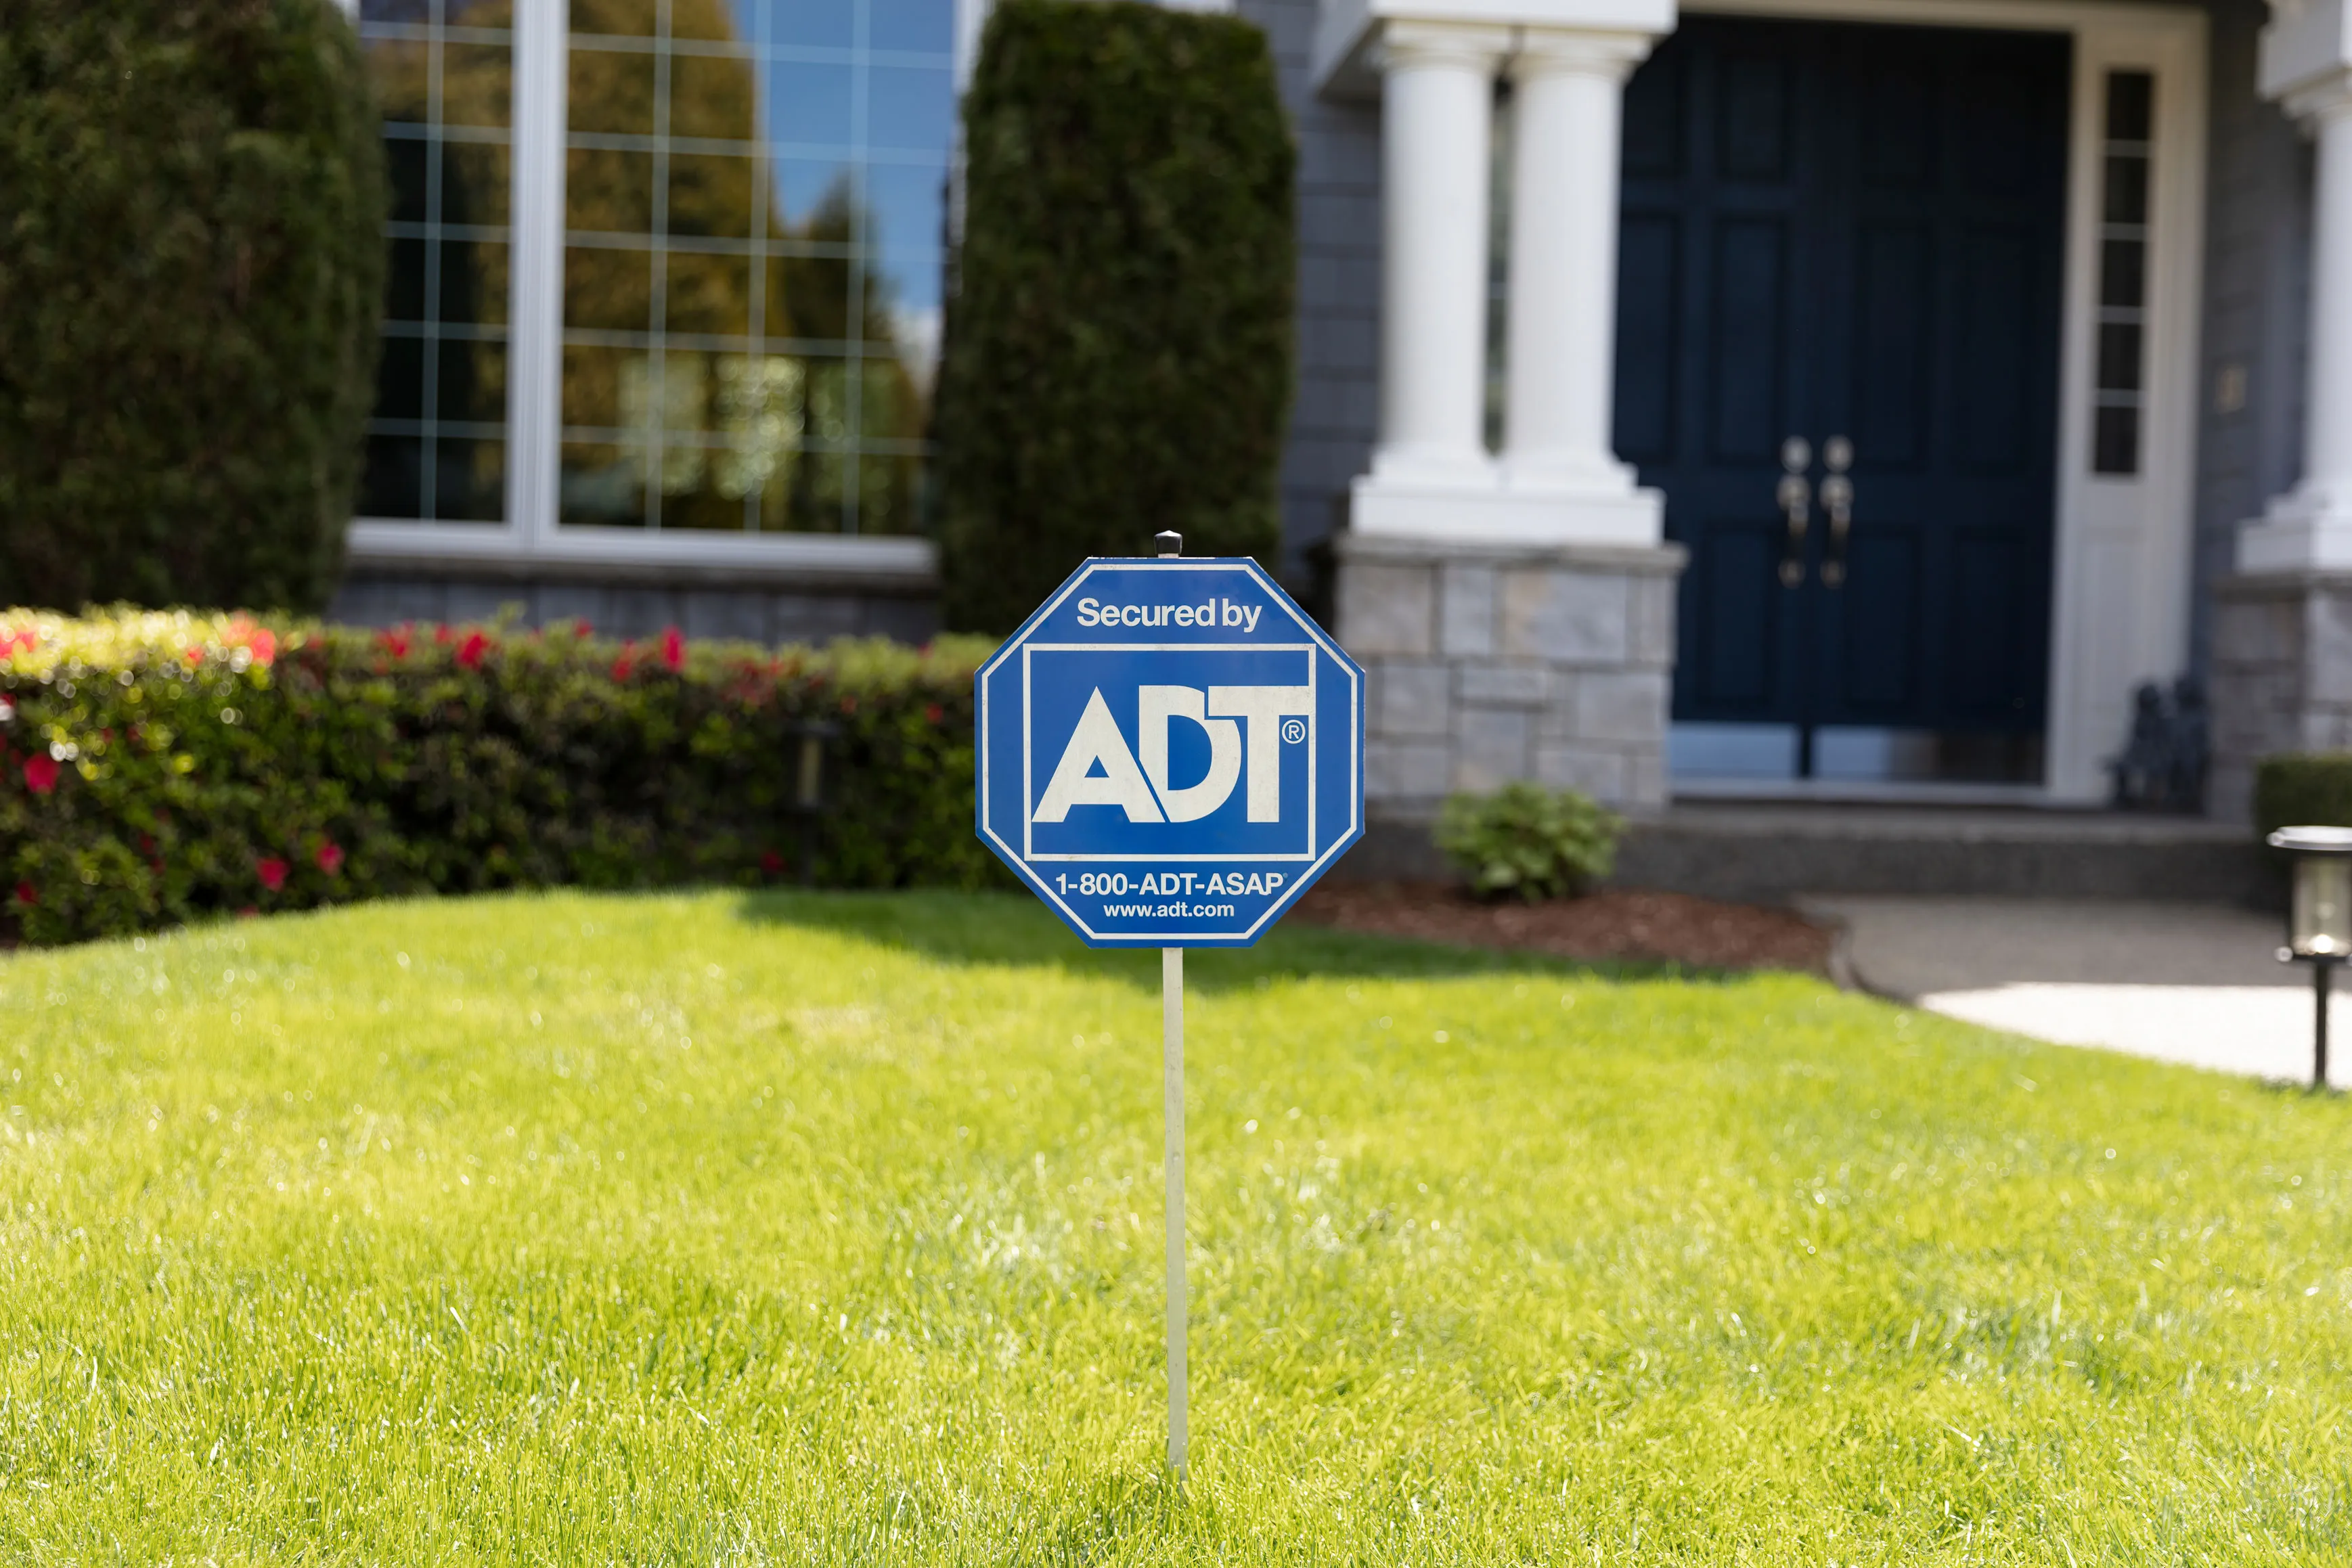 How Does ADT Work?